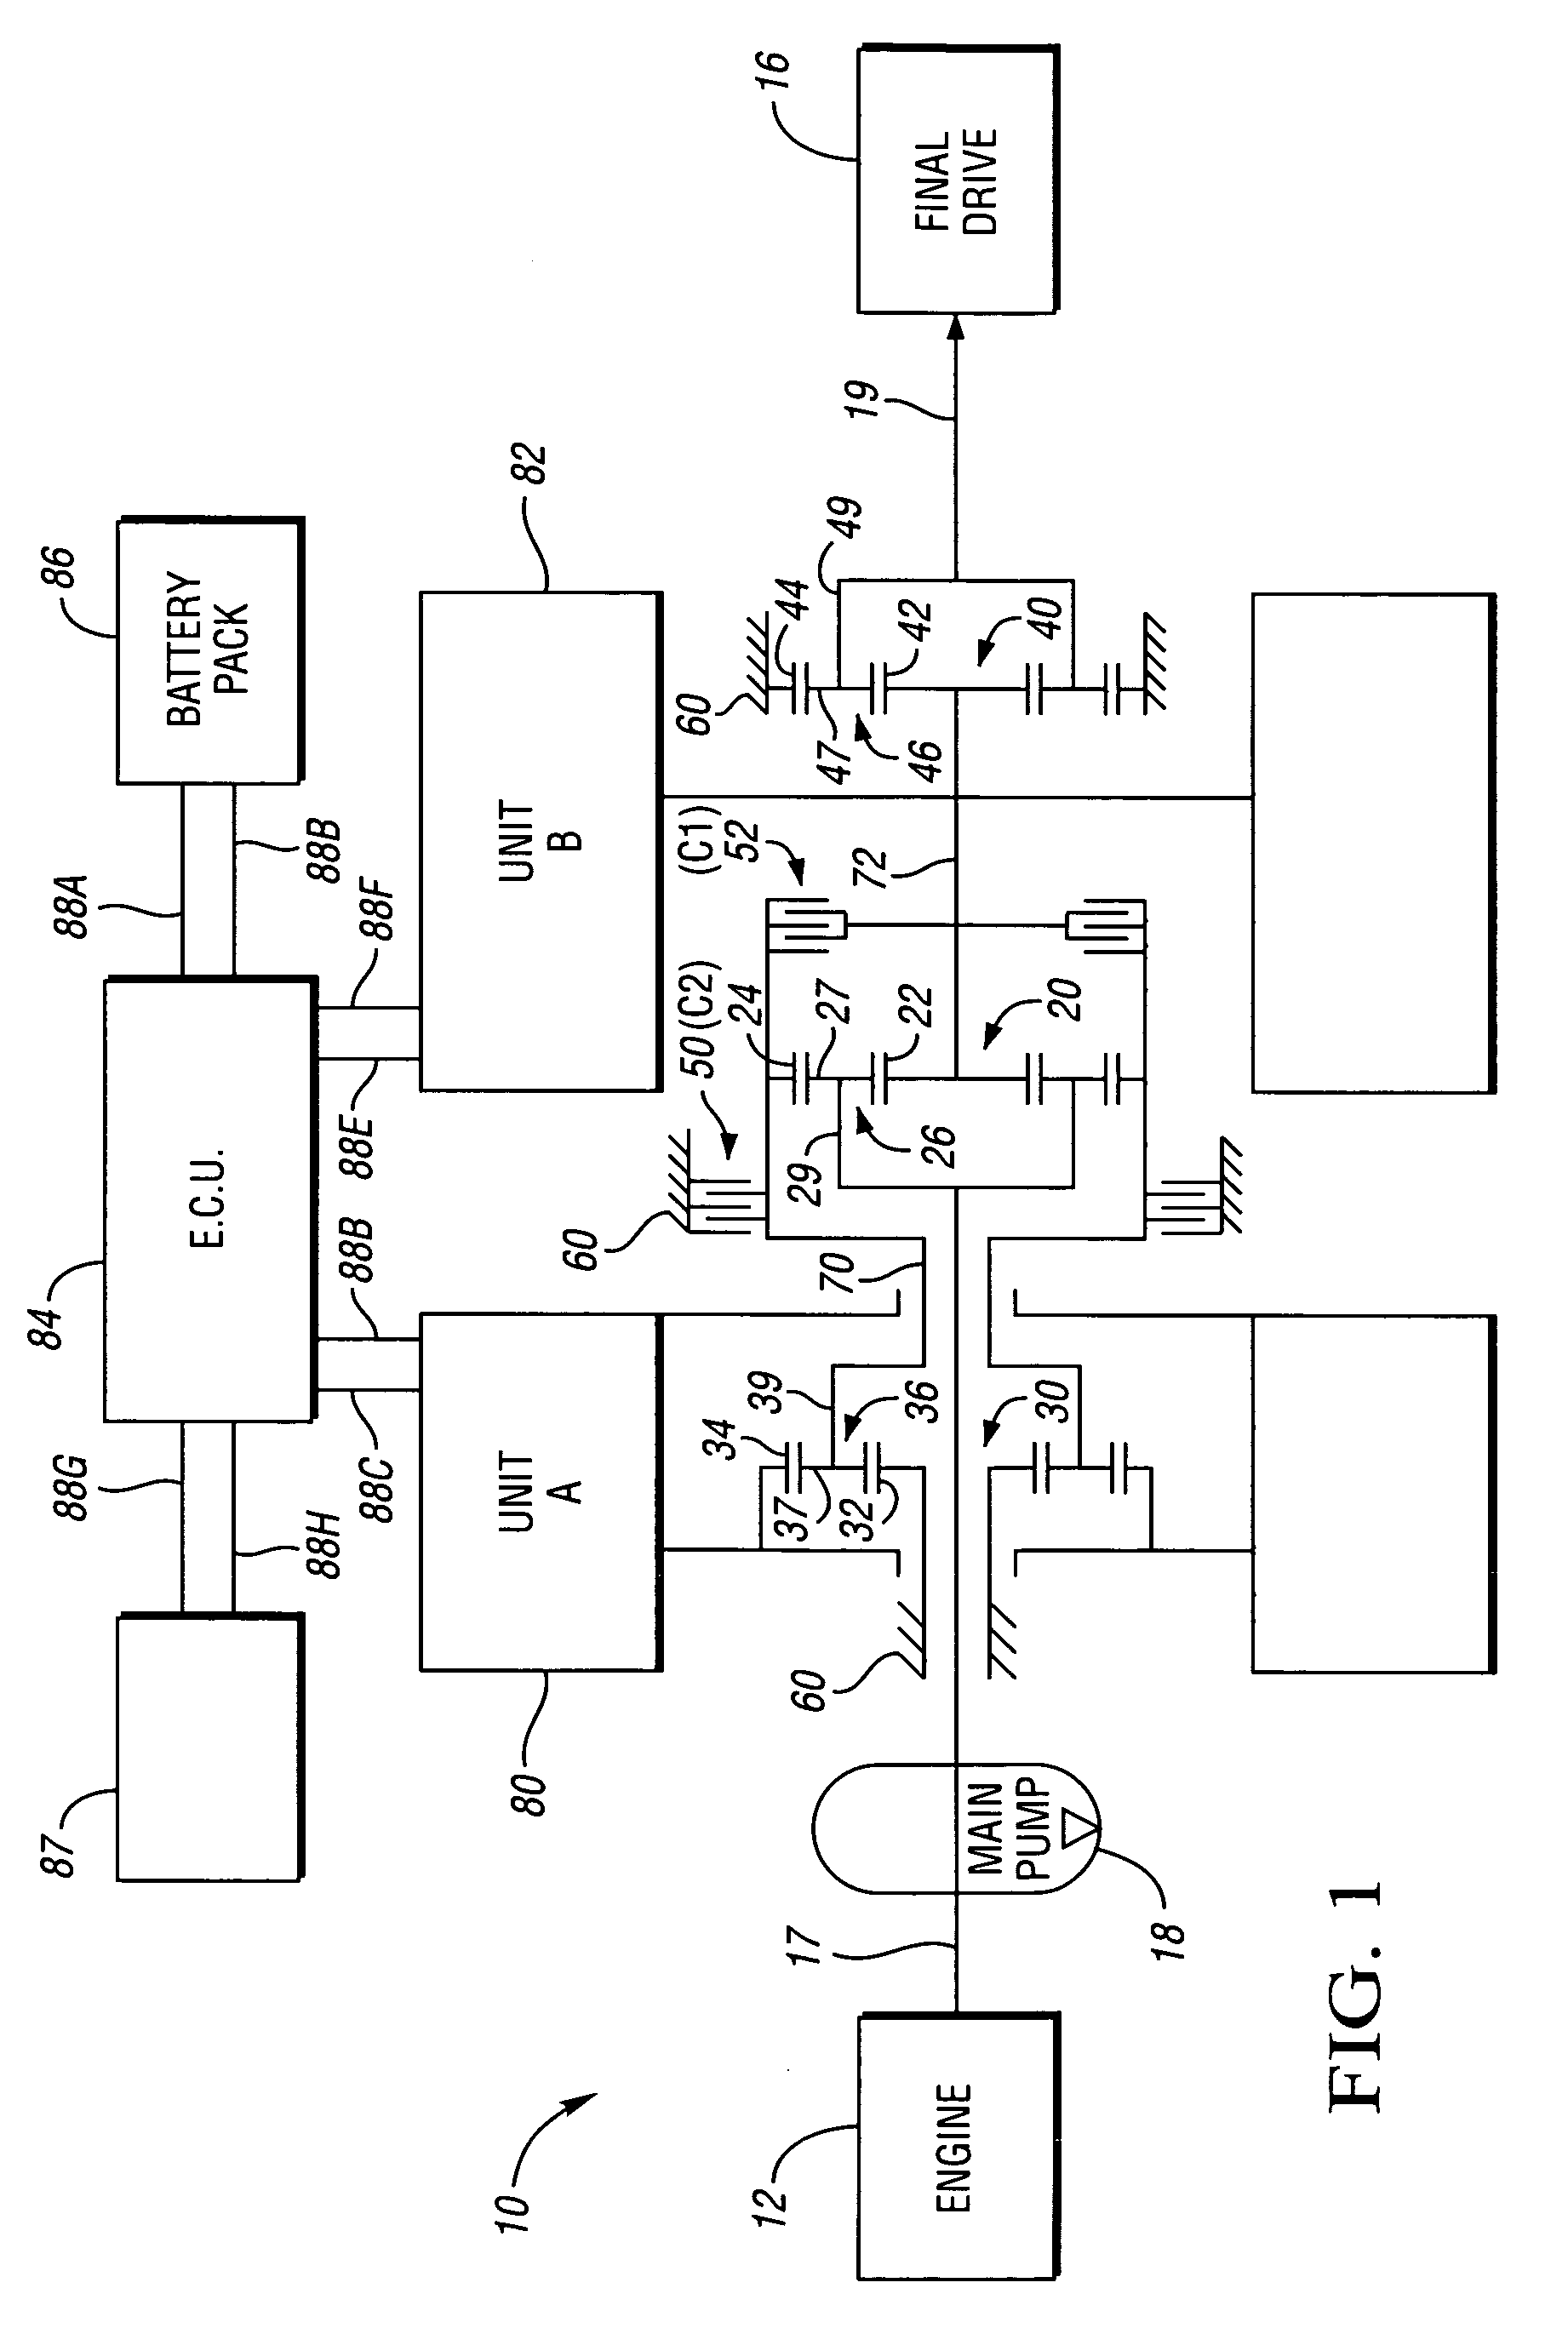 One-mode input-split electro-mechanical transmission with two fixed speed ratios